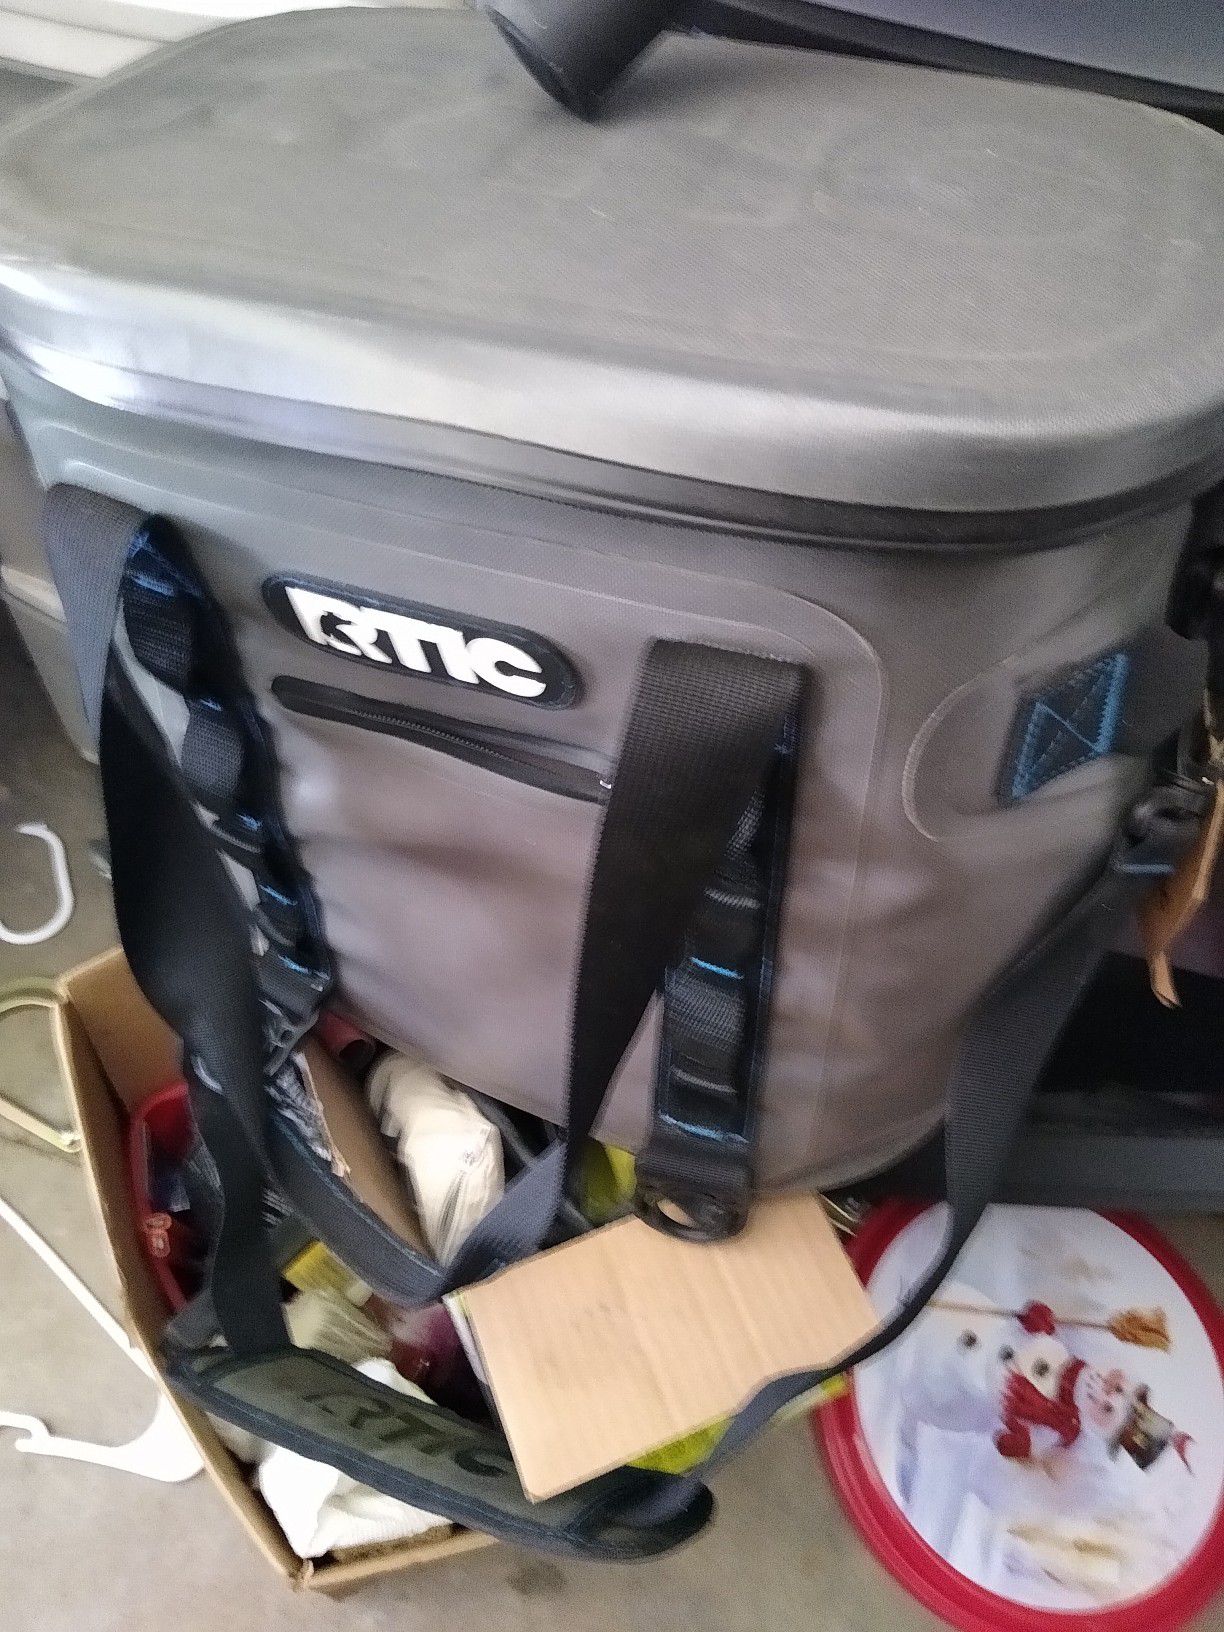 Rtic cooler like new used once